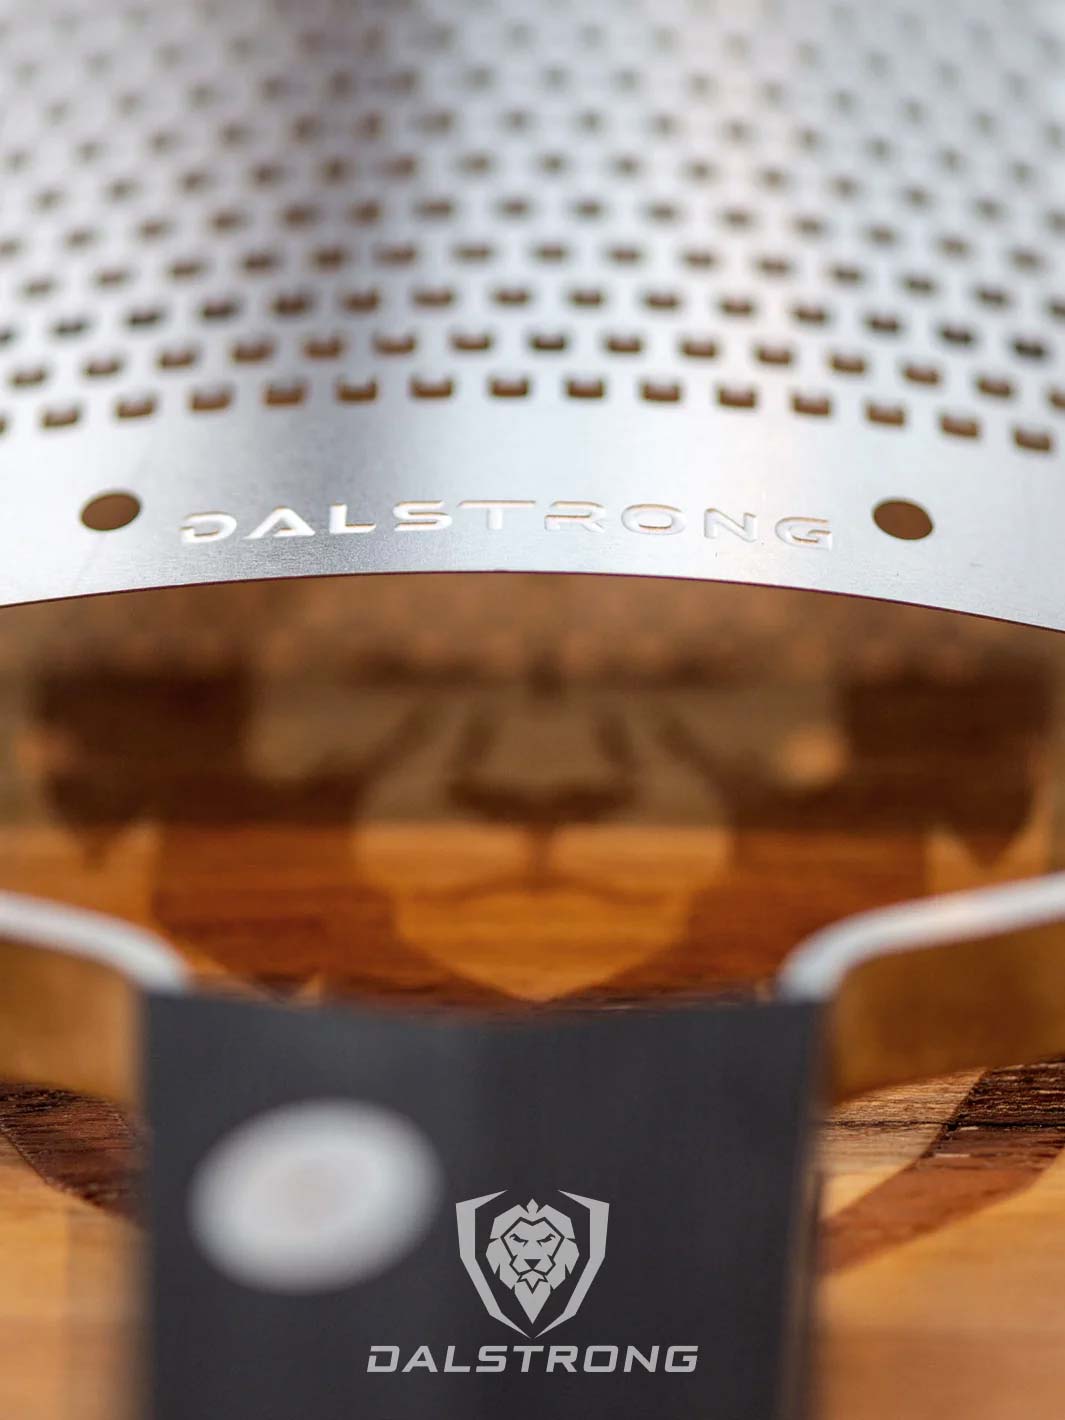 Dalstrong professional fine wide cheese grater showcasing it's stainless steel grater with dalstrong engraved on it.